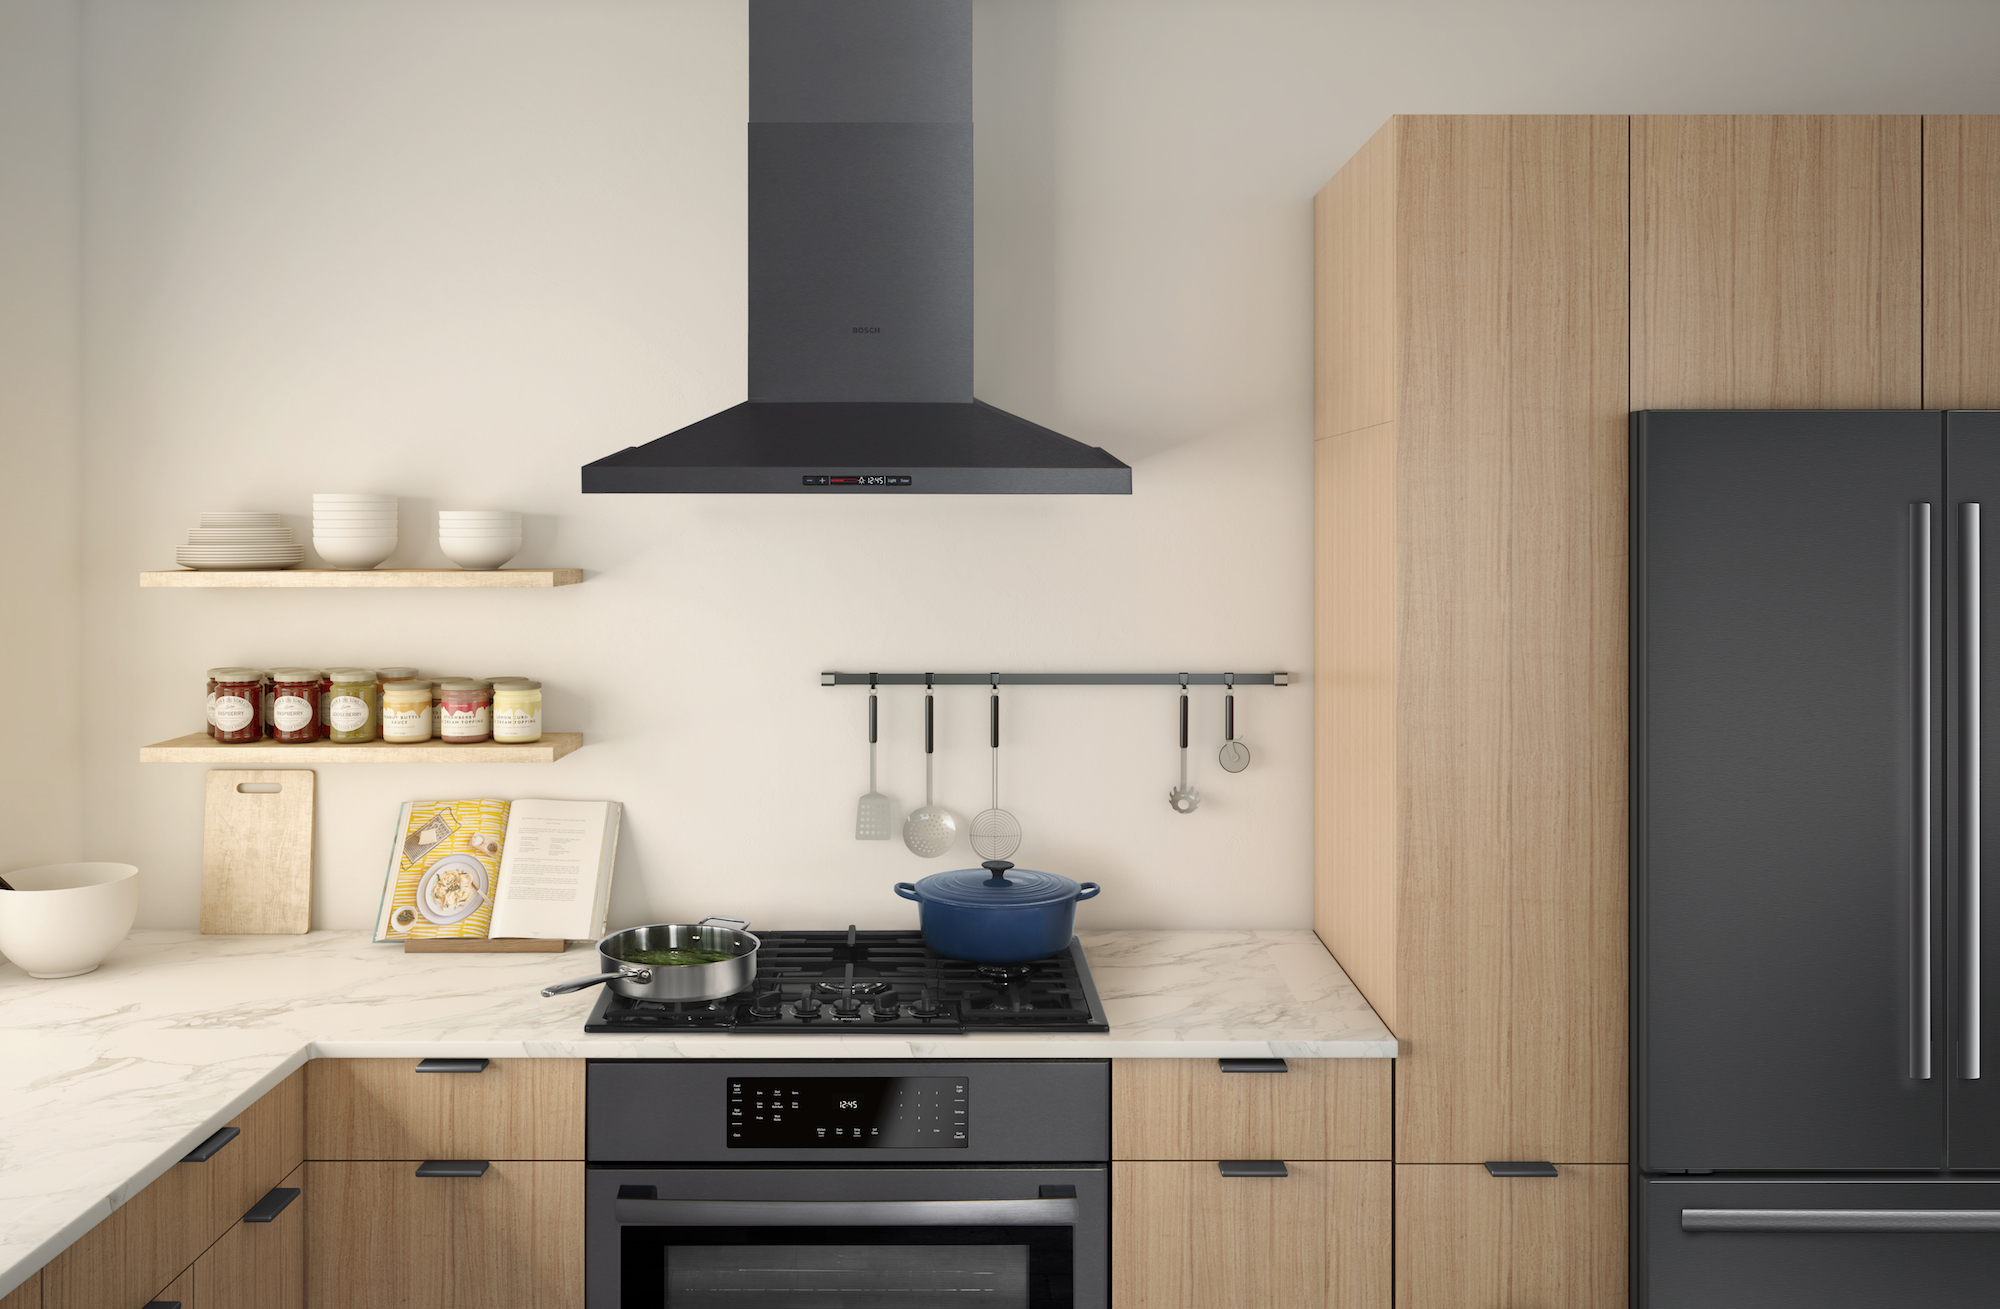 Bosch Home Appliances Introduces First Black Stainless Steel Kitchen